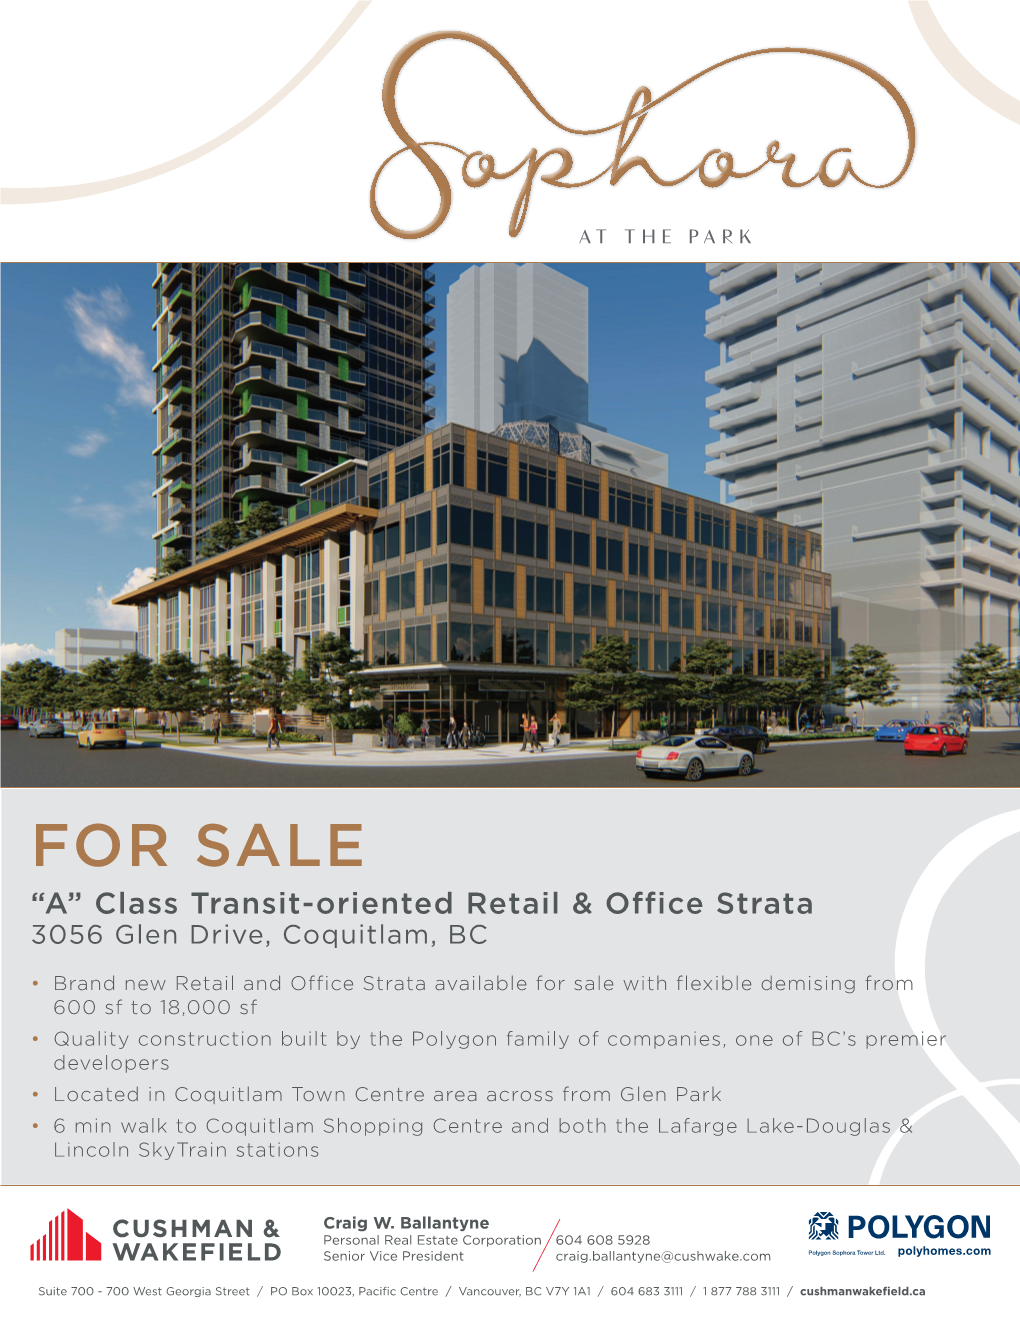 FOR SALE “A” Class Transit-Oriented Retail & Office Strata 3056 Glen Drive, Coquitlam, BC